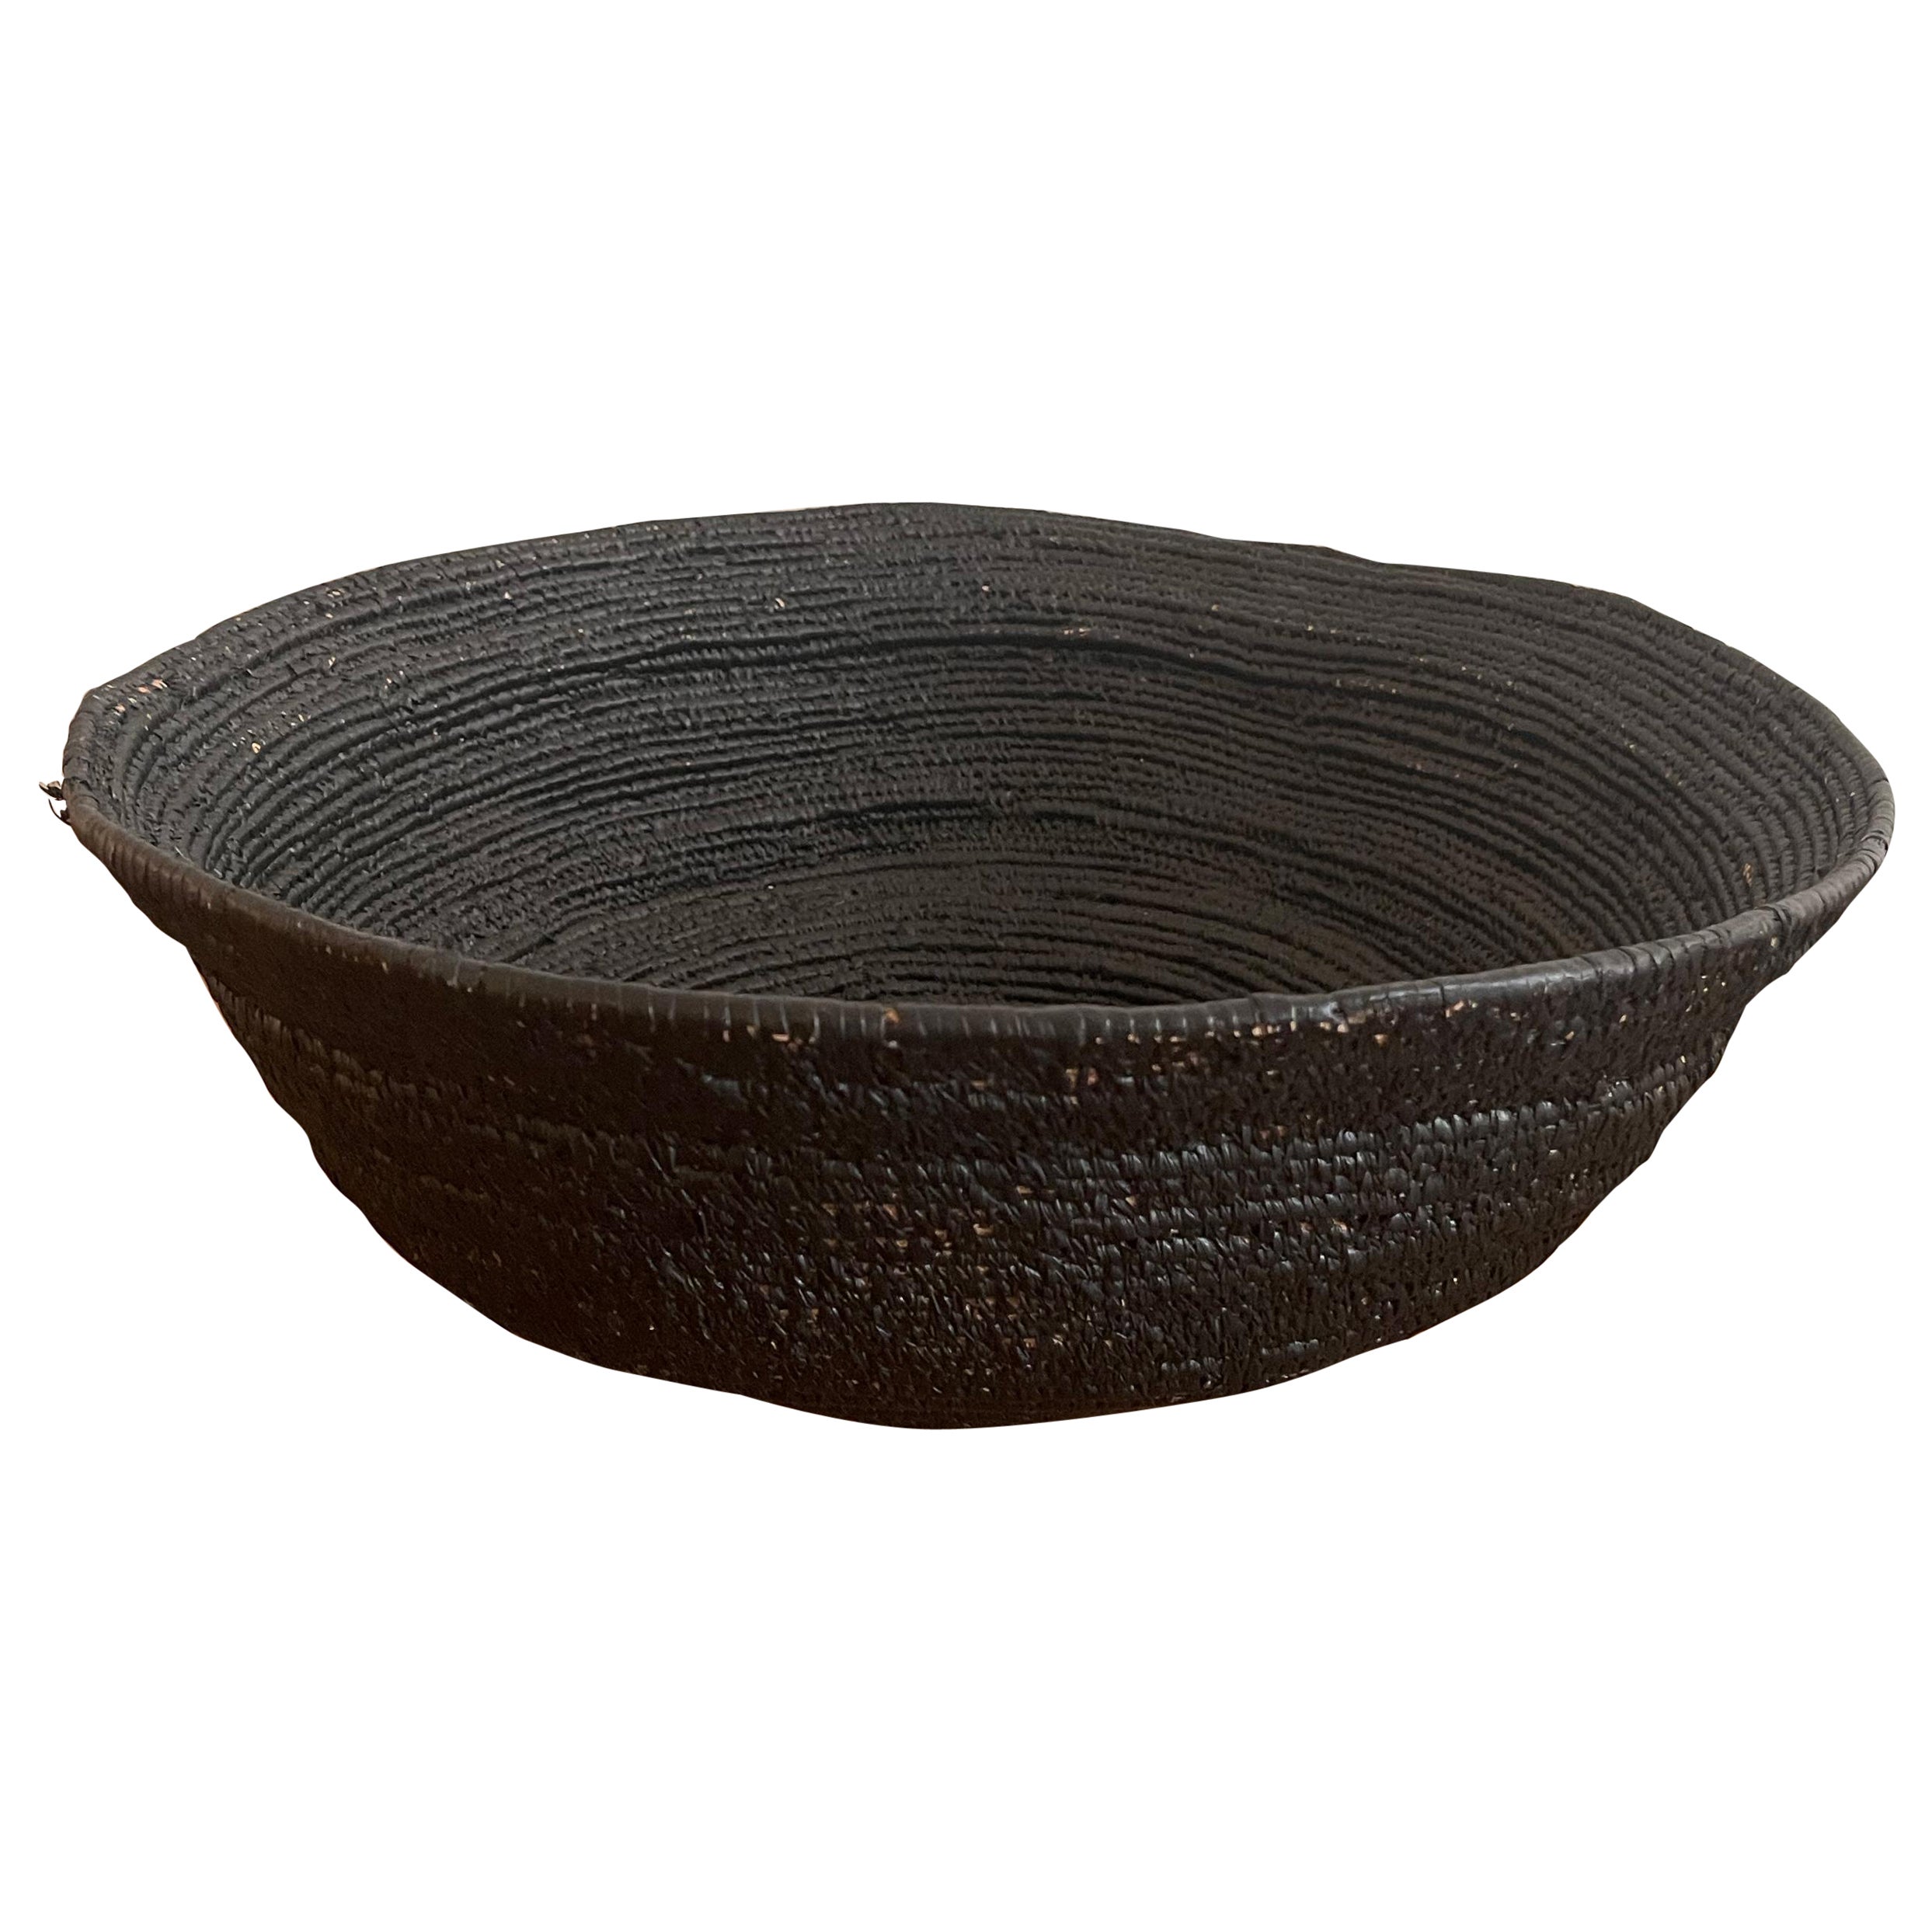 Charcoal Seagrass Woven Basket